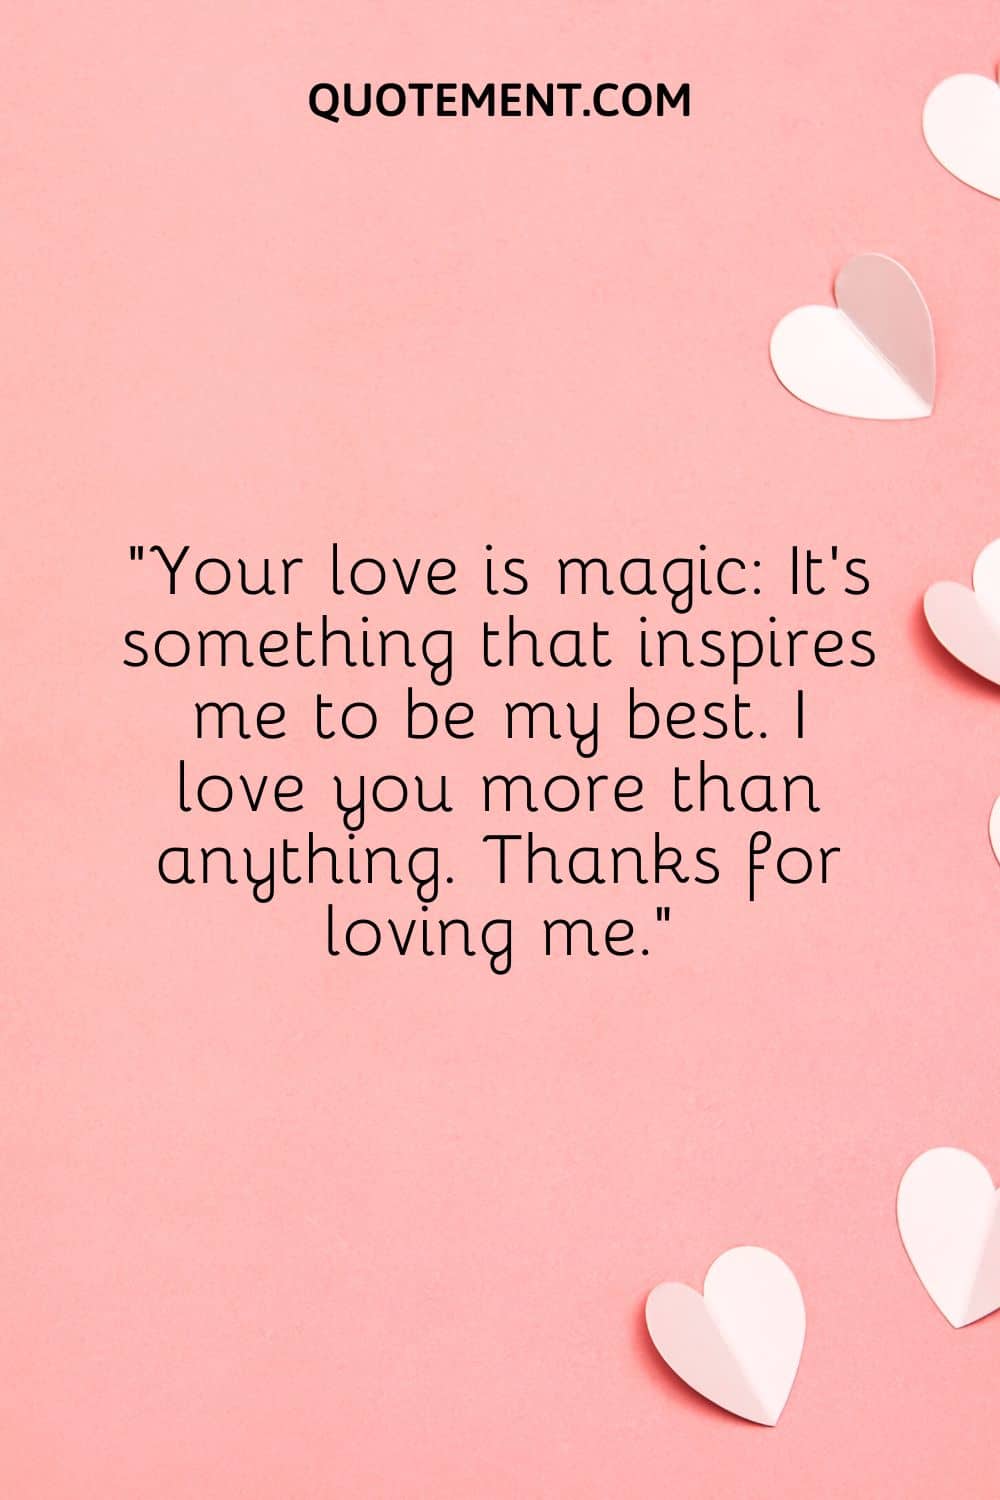 Your love is magic It’s something that inspires me to be my best